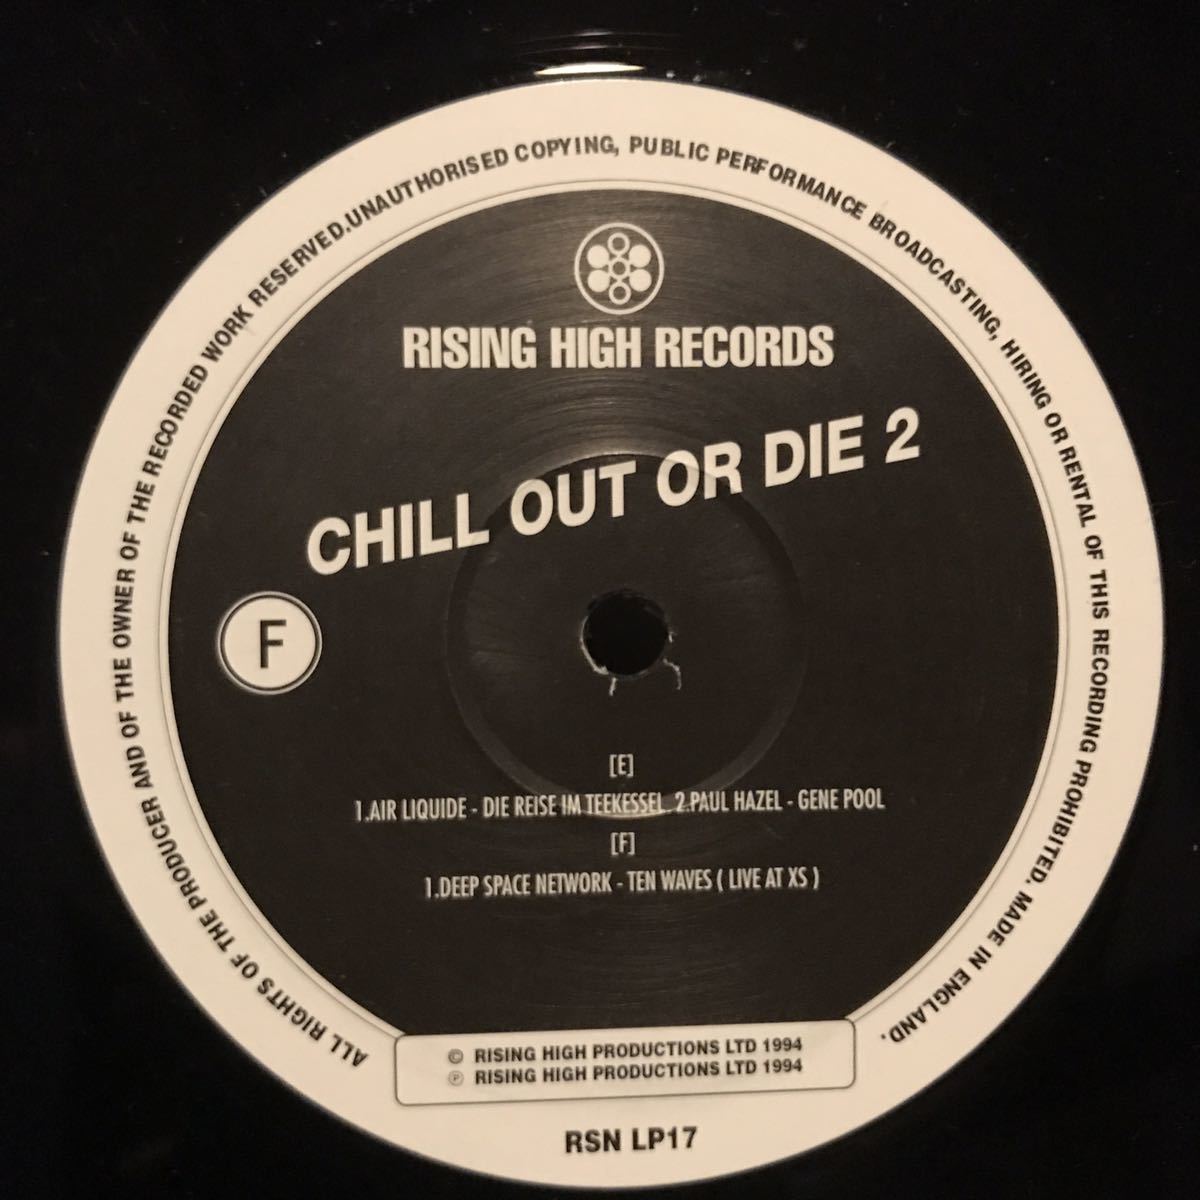 [ Various - Chill Out Or Die II - Rising High Records RSN LP 17 ] Bedouin Ascent , The Irresistible Force , Wagon Christの画像8